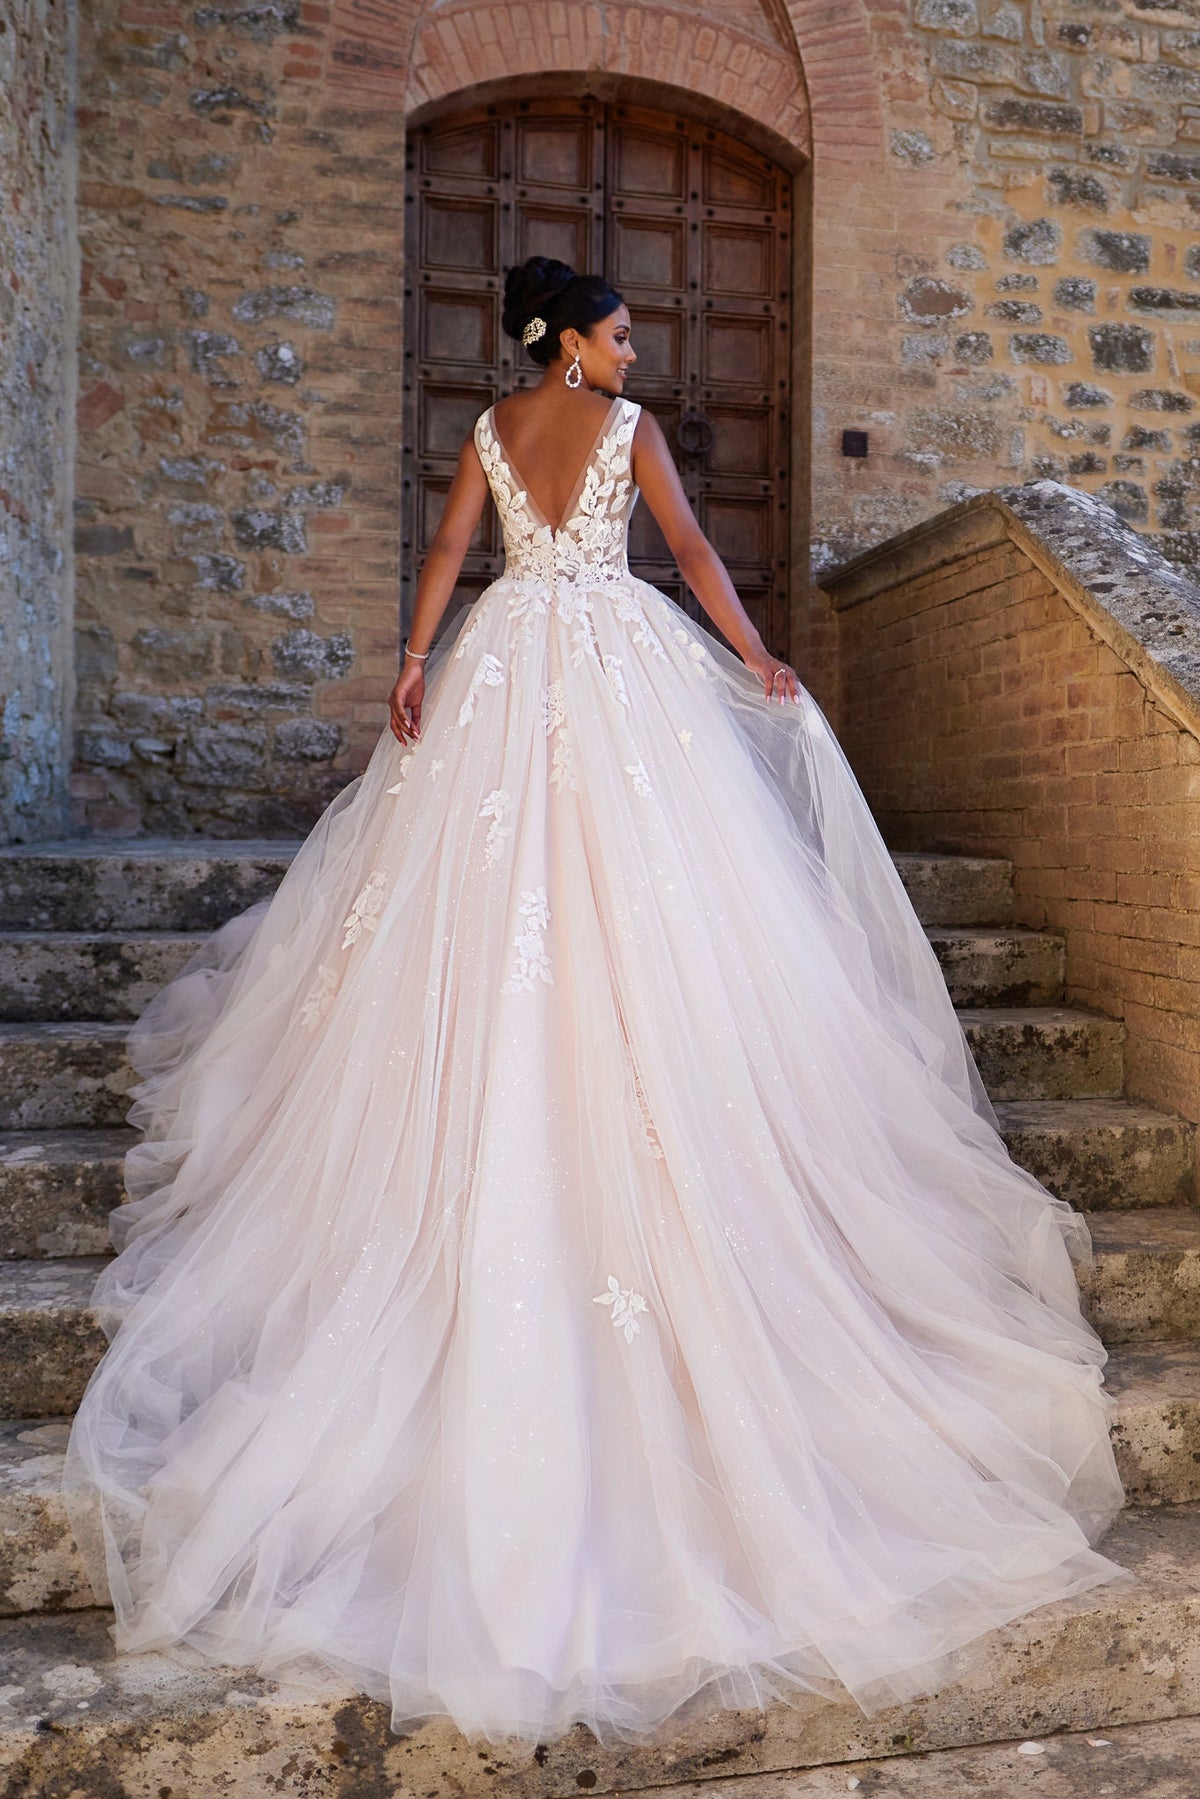 Luxurious Lace and Tulle Bridal Ball Gown with Deep V-Neck and Sparkling Floral Appliqués Wedding Dress